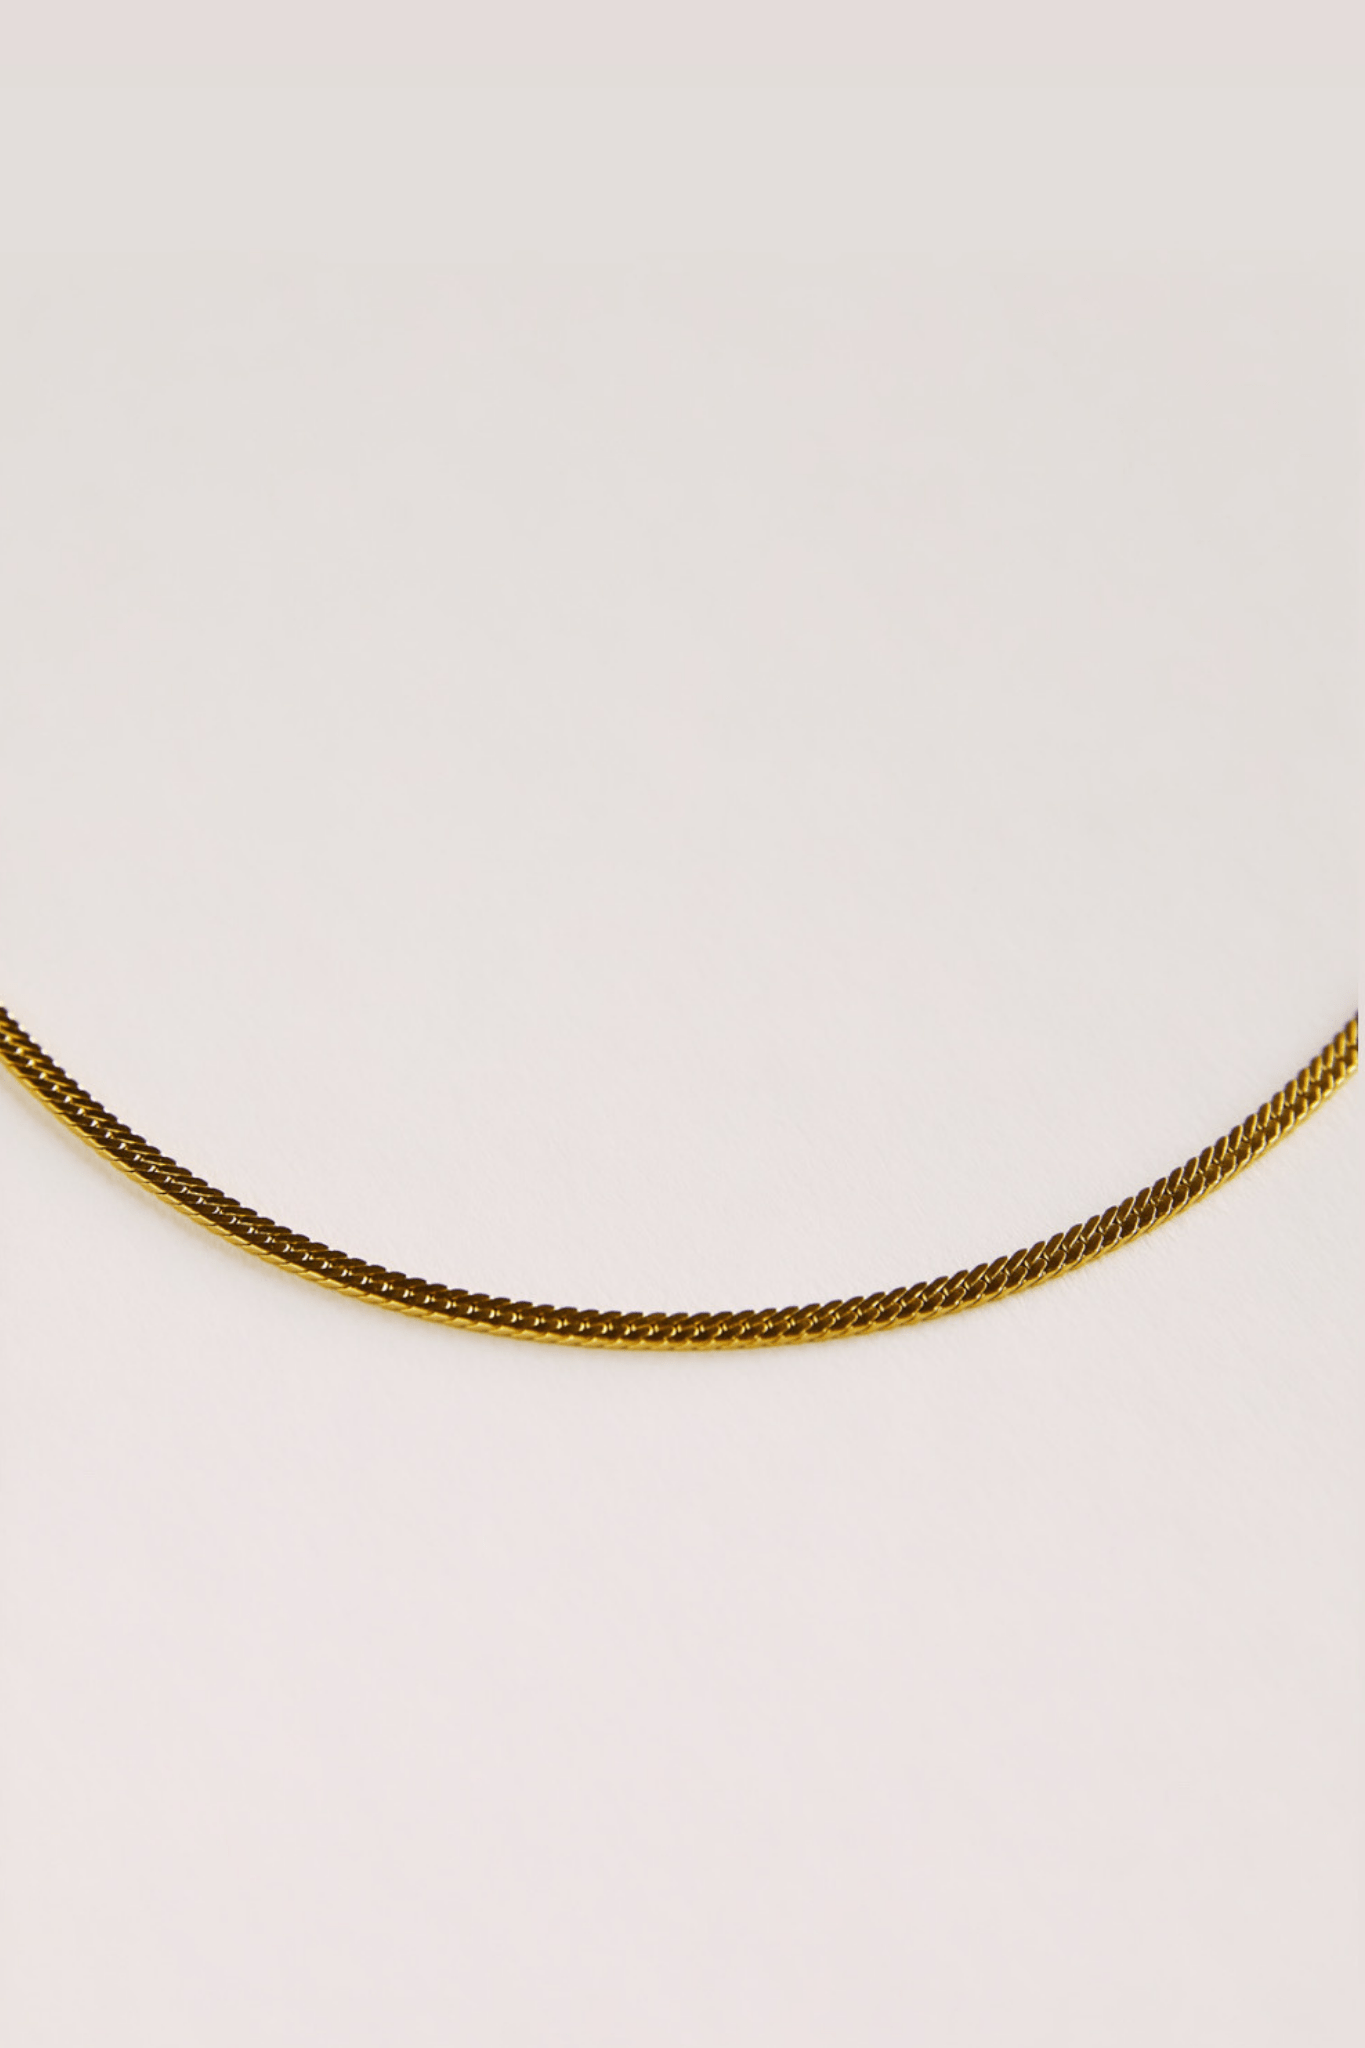 Emery Chain Necklace - Recycled Silver Gold Plated